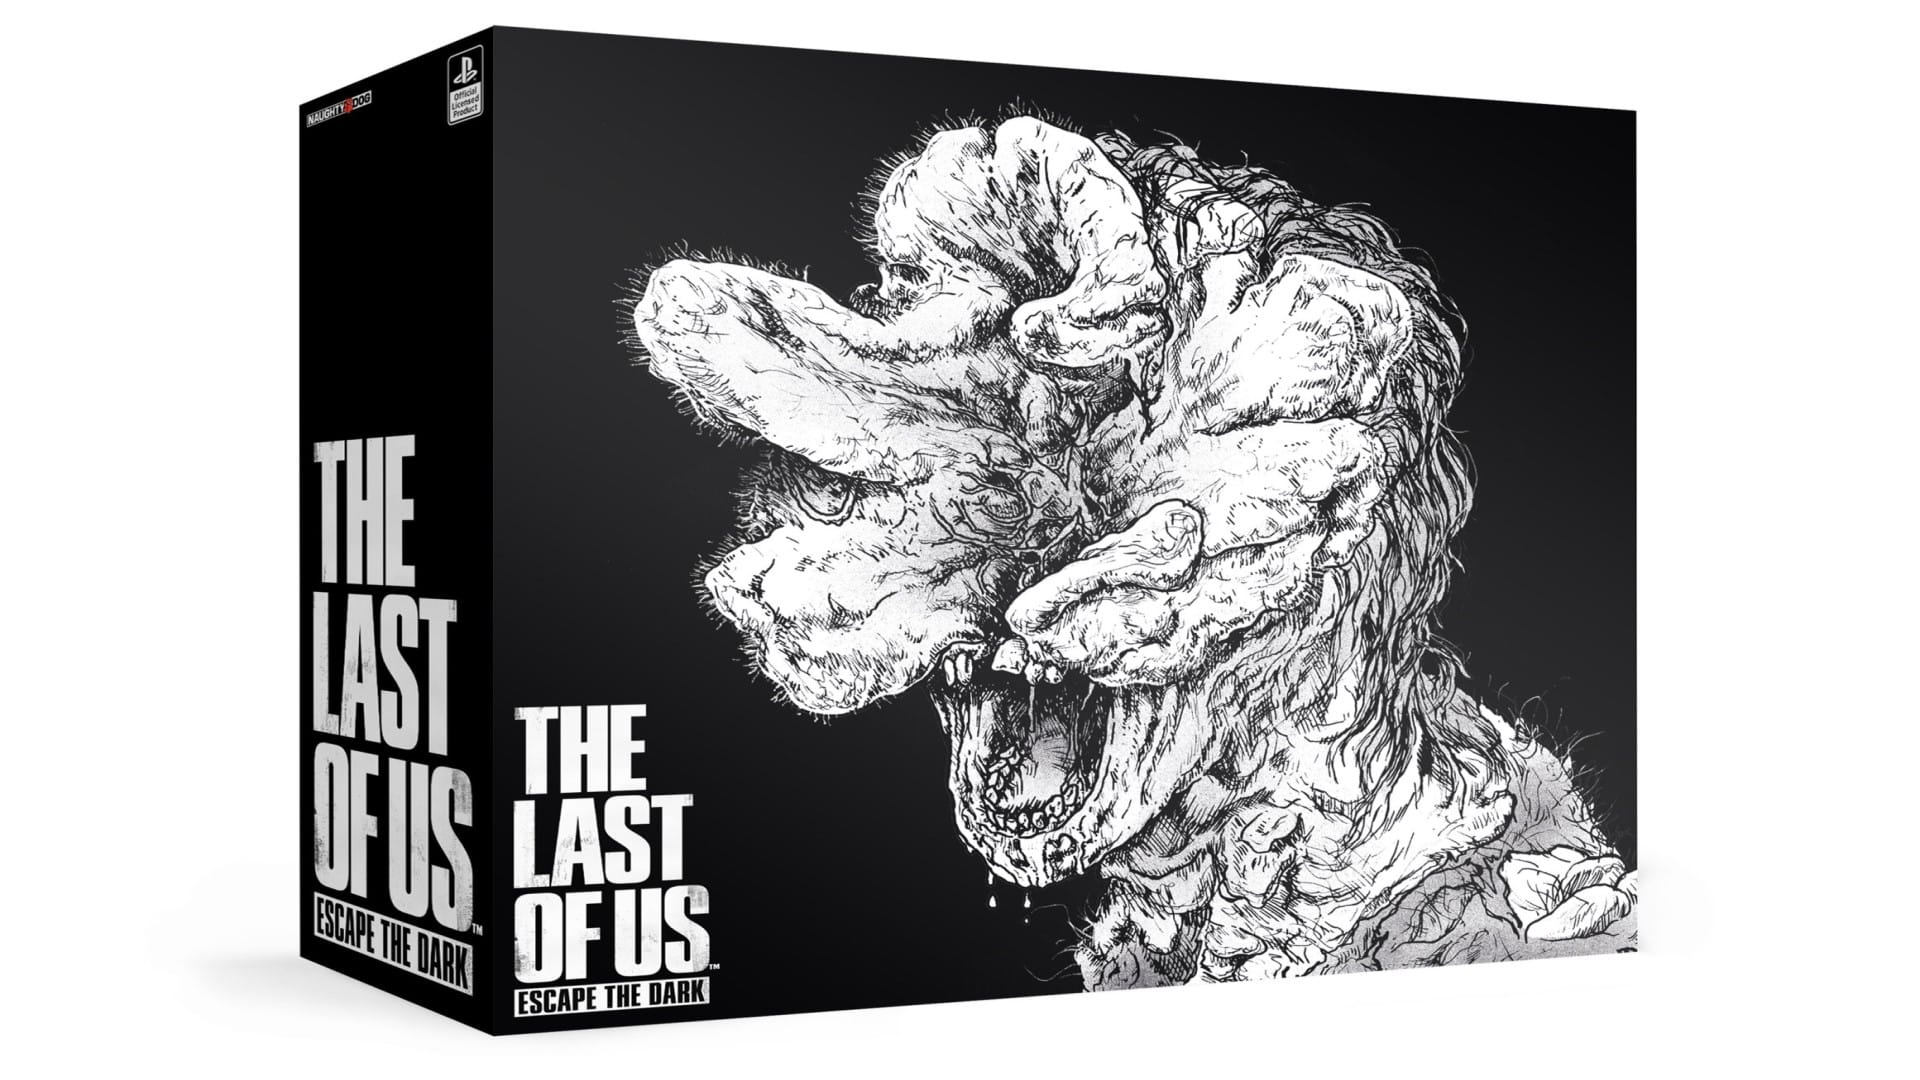 The Last of Us Board Game Announced By Naughty Dog